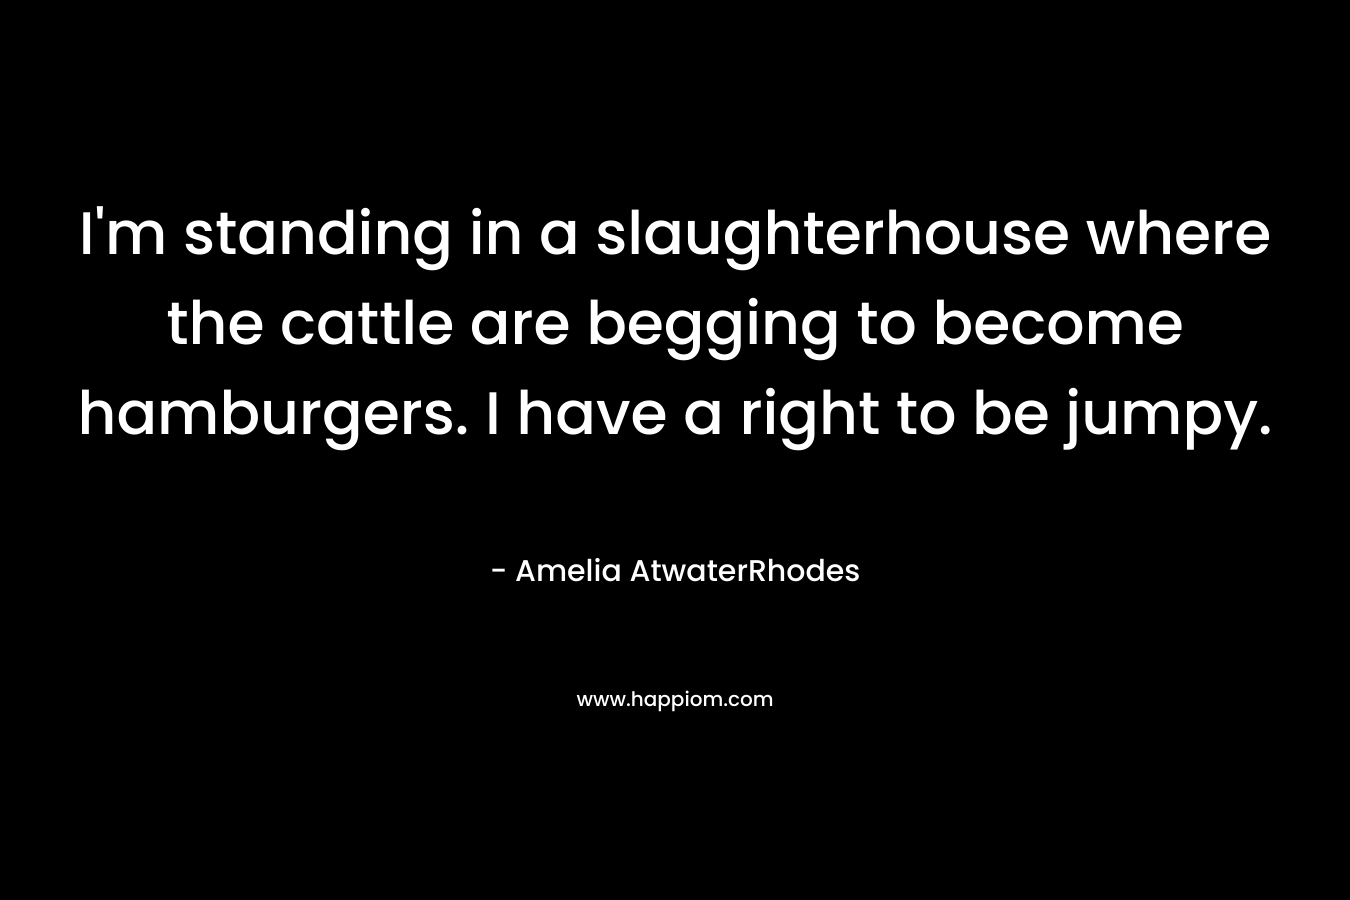 I’m standing in a slaughterhouse where the cattle are begging to become hamburgers. I have a right to be jumpy. – Amelia AtwaterRhodes